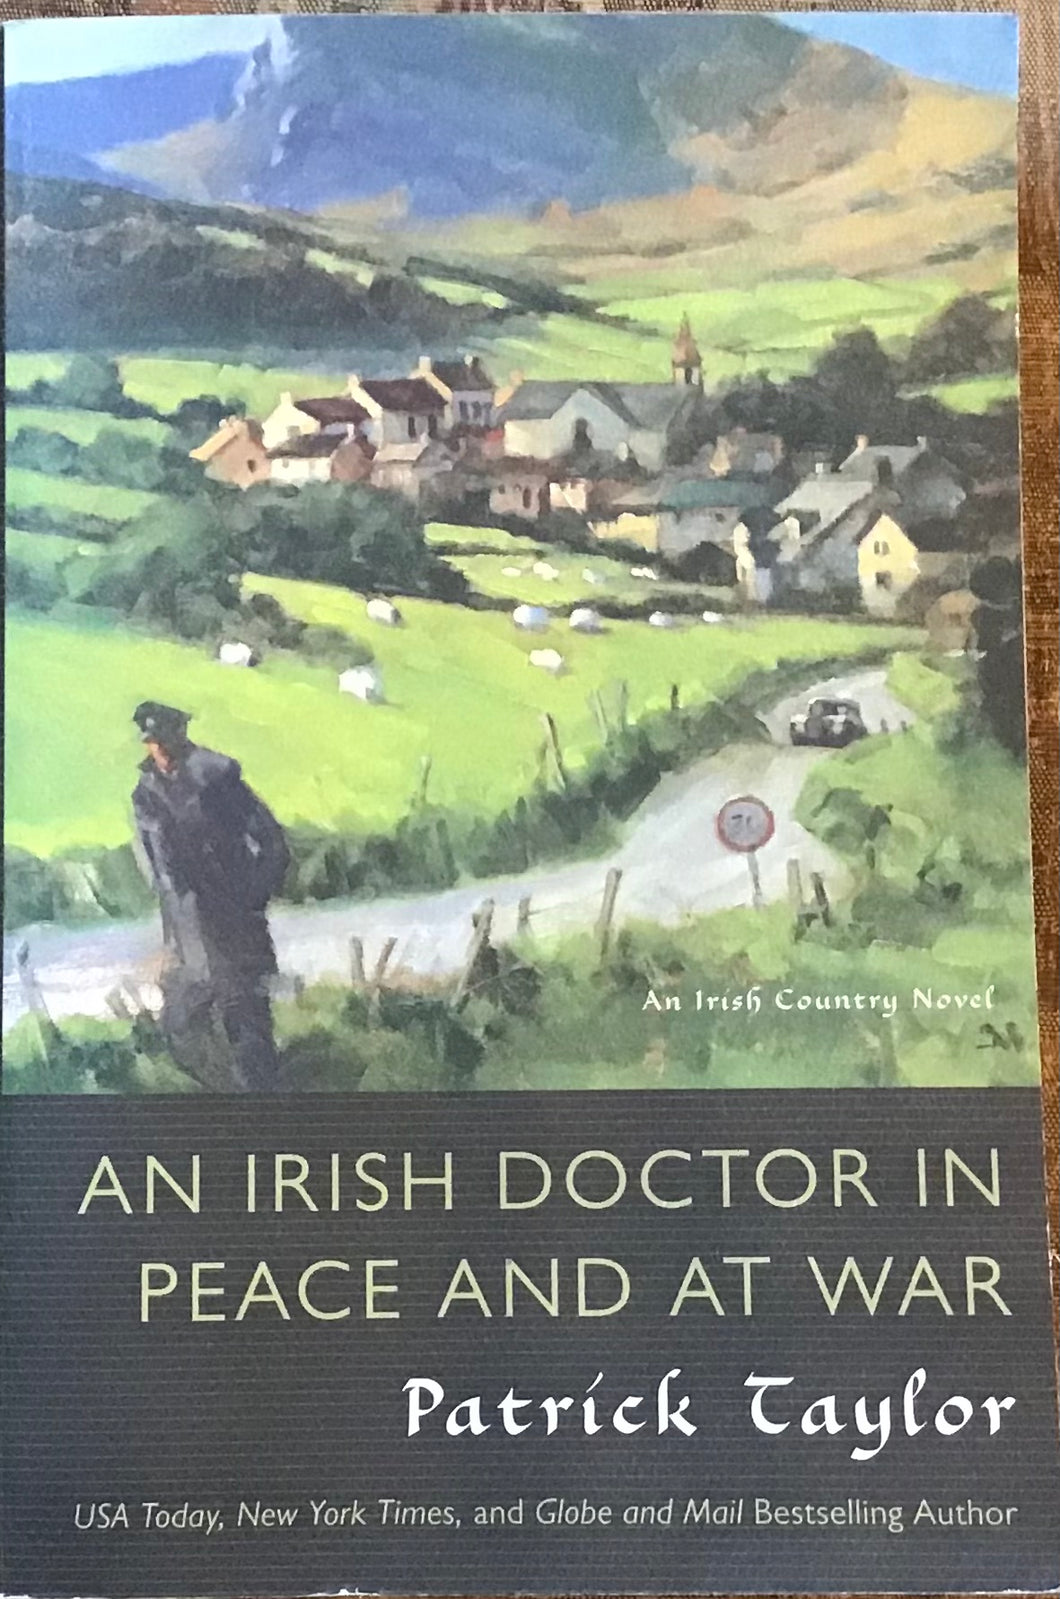 An Irish Doctor in Peace and At War, Patrick Taylor